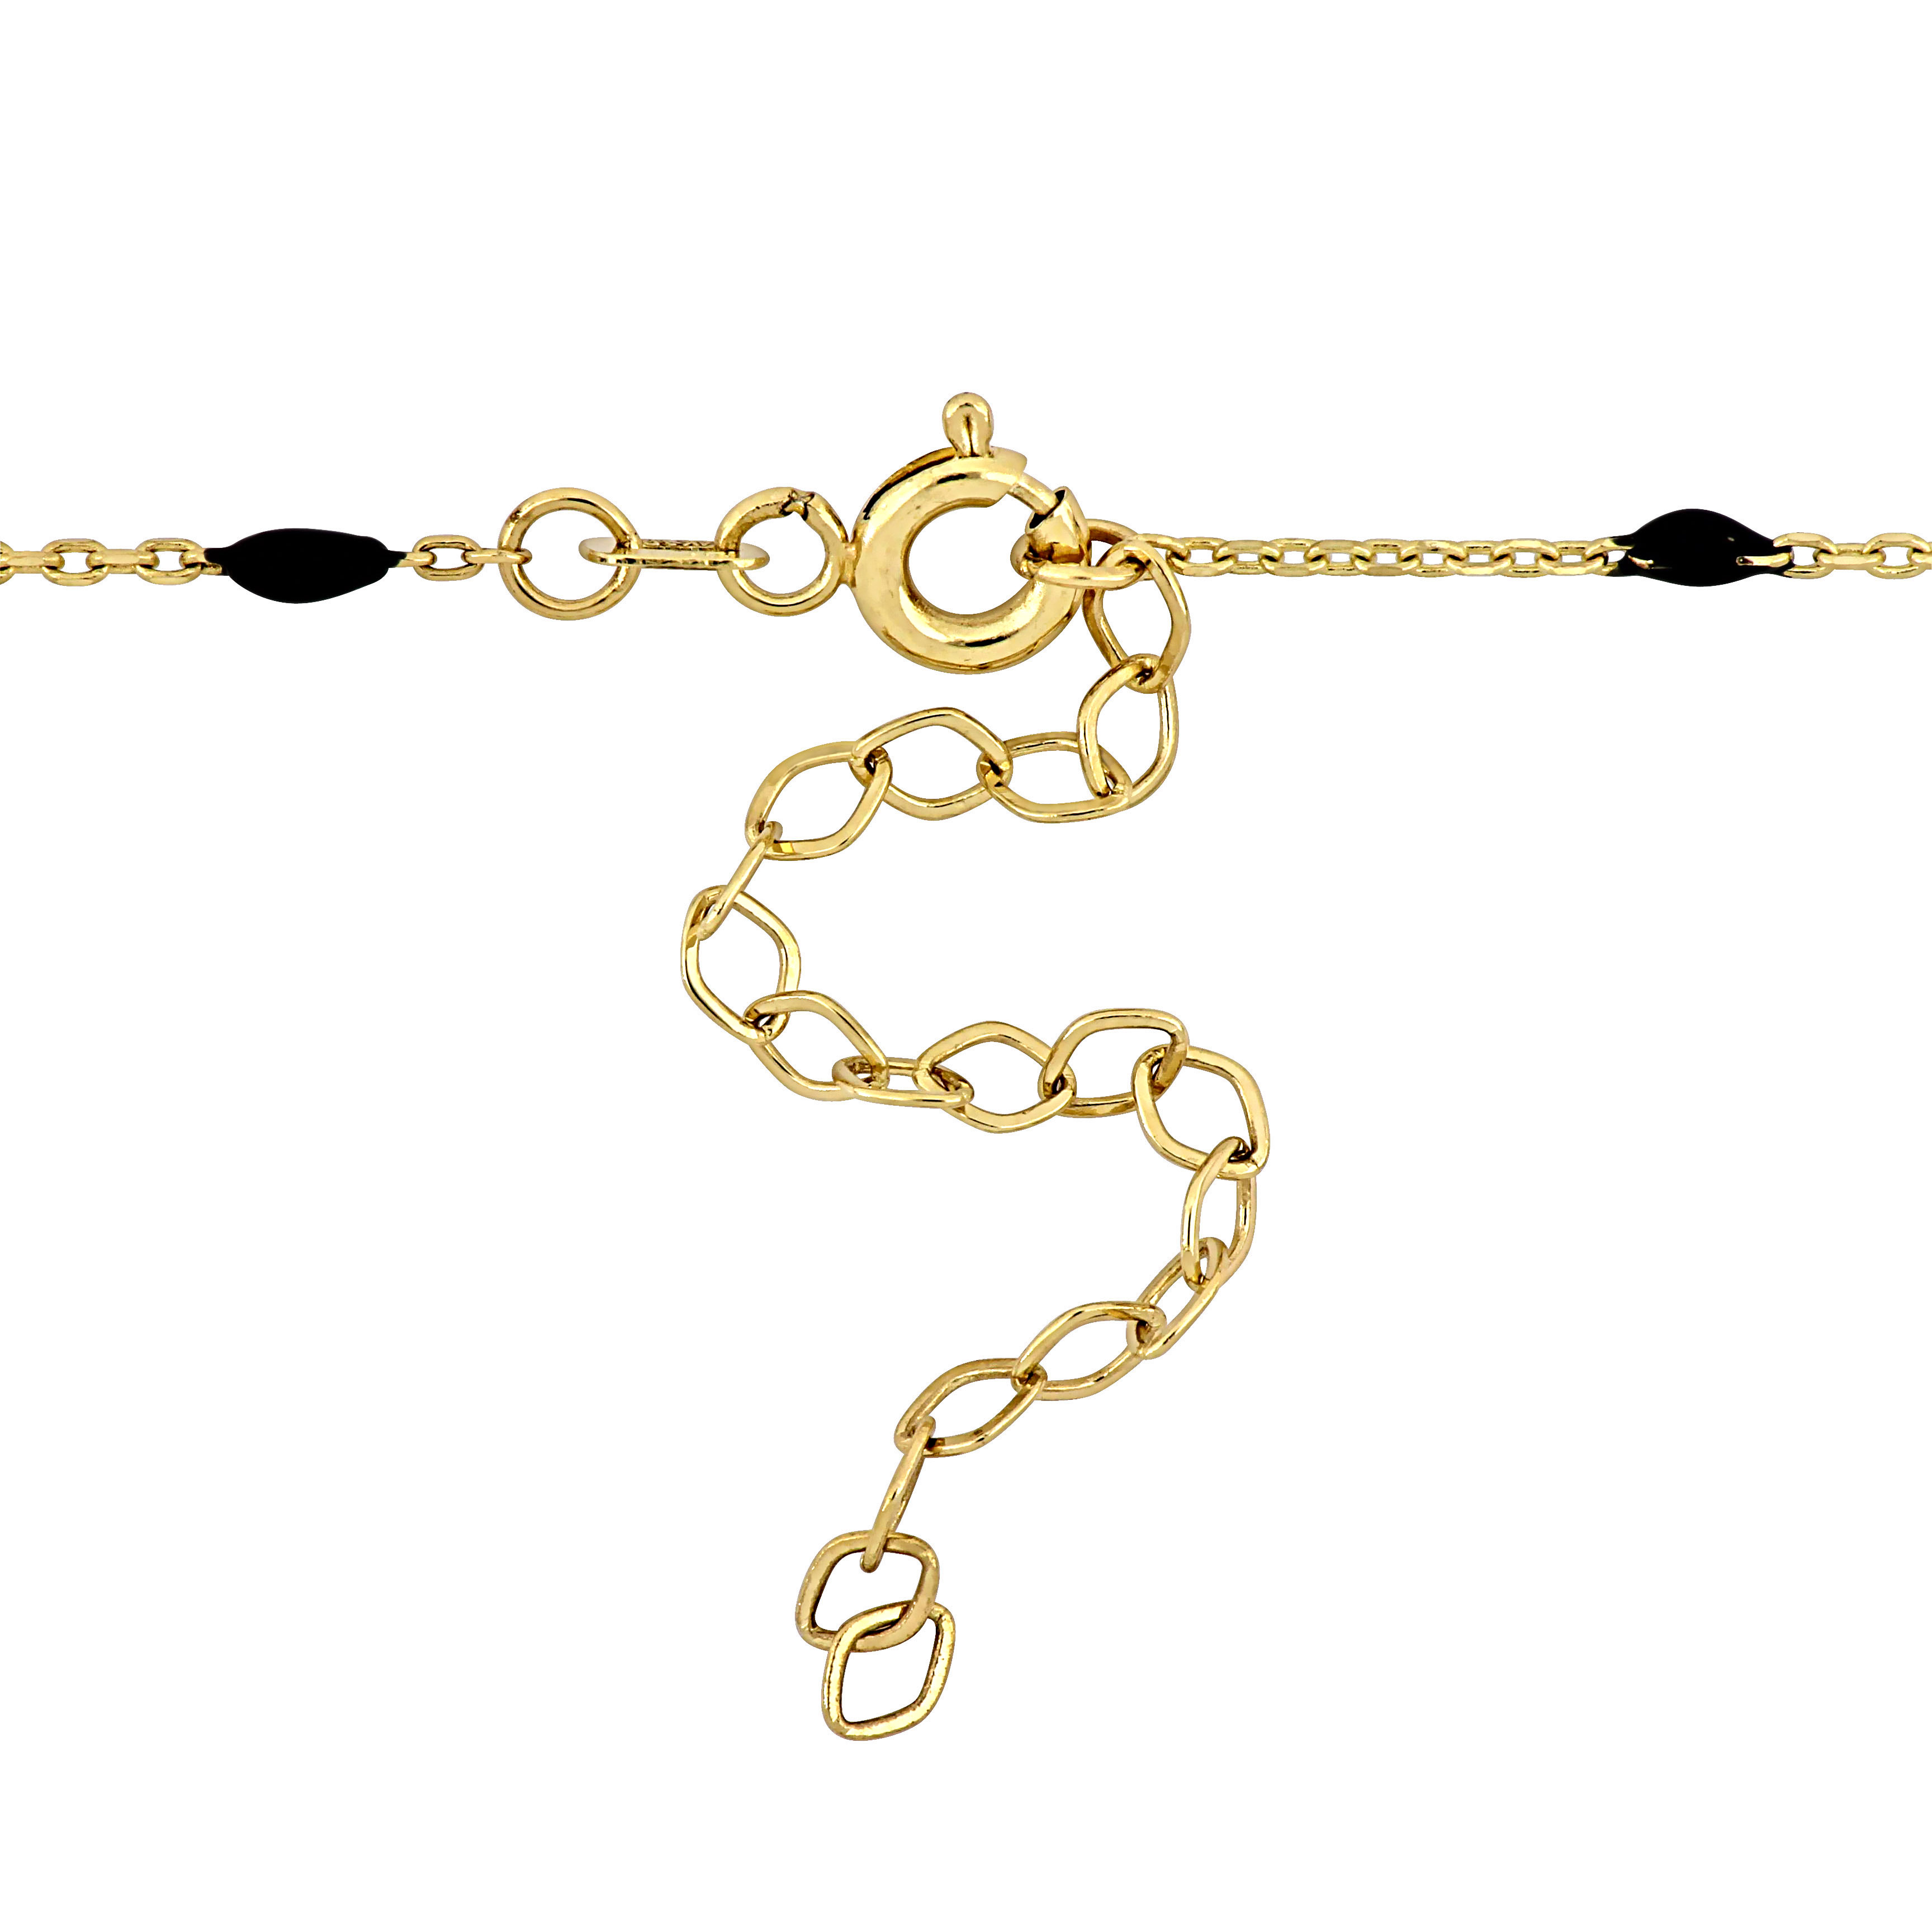 Black Enamel Station Necklace in 14K Yellow Gold - 16+2 in.